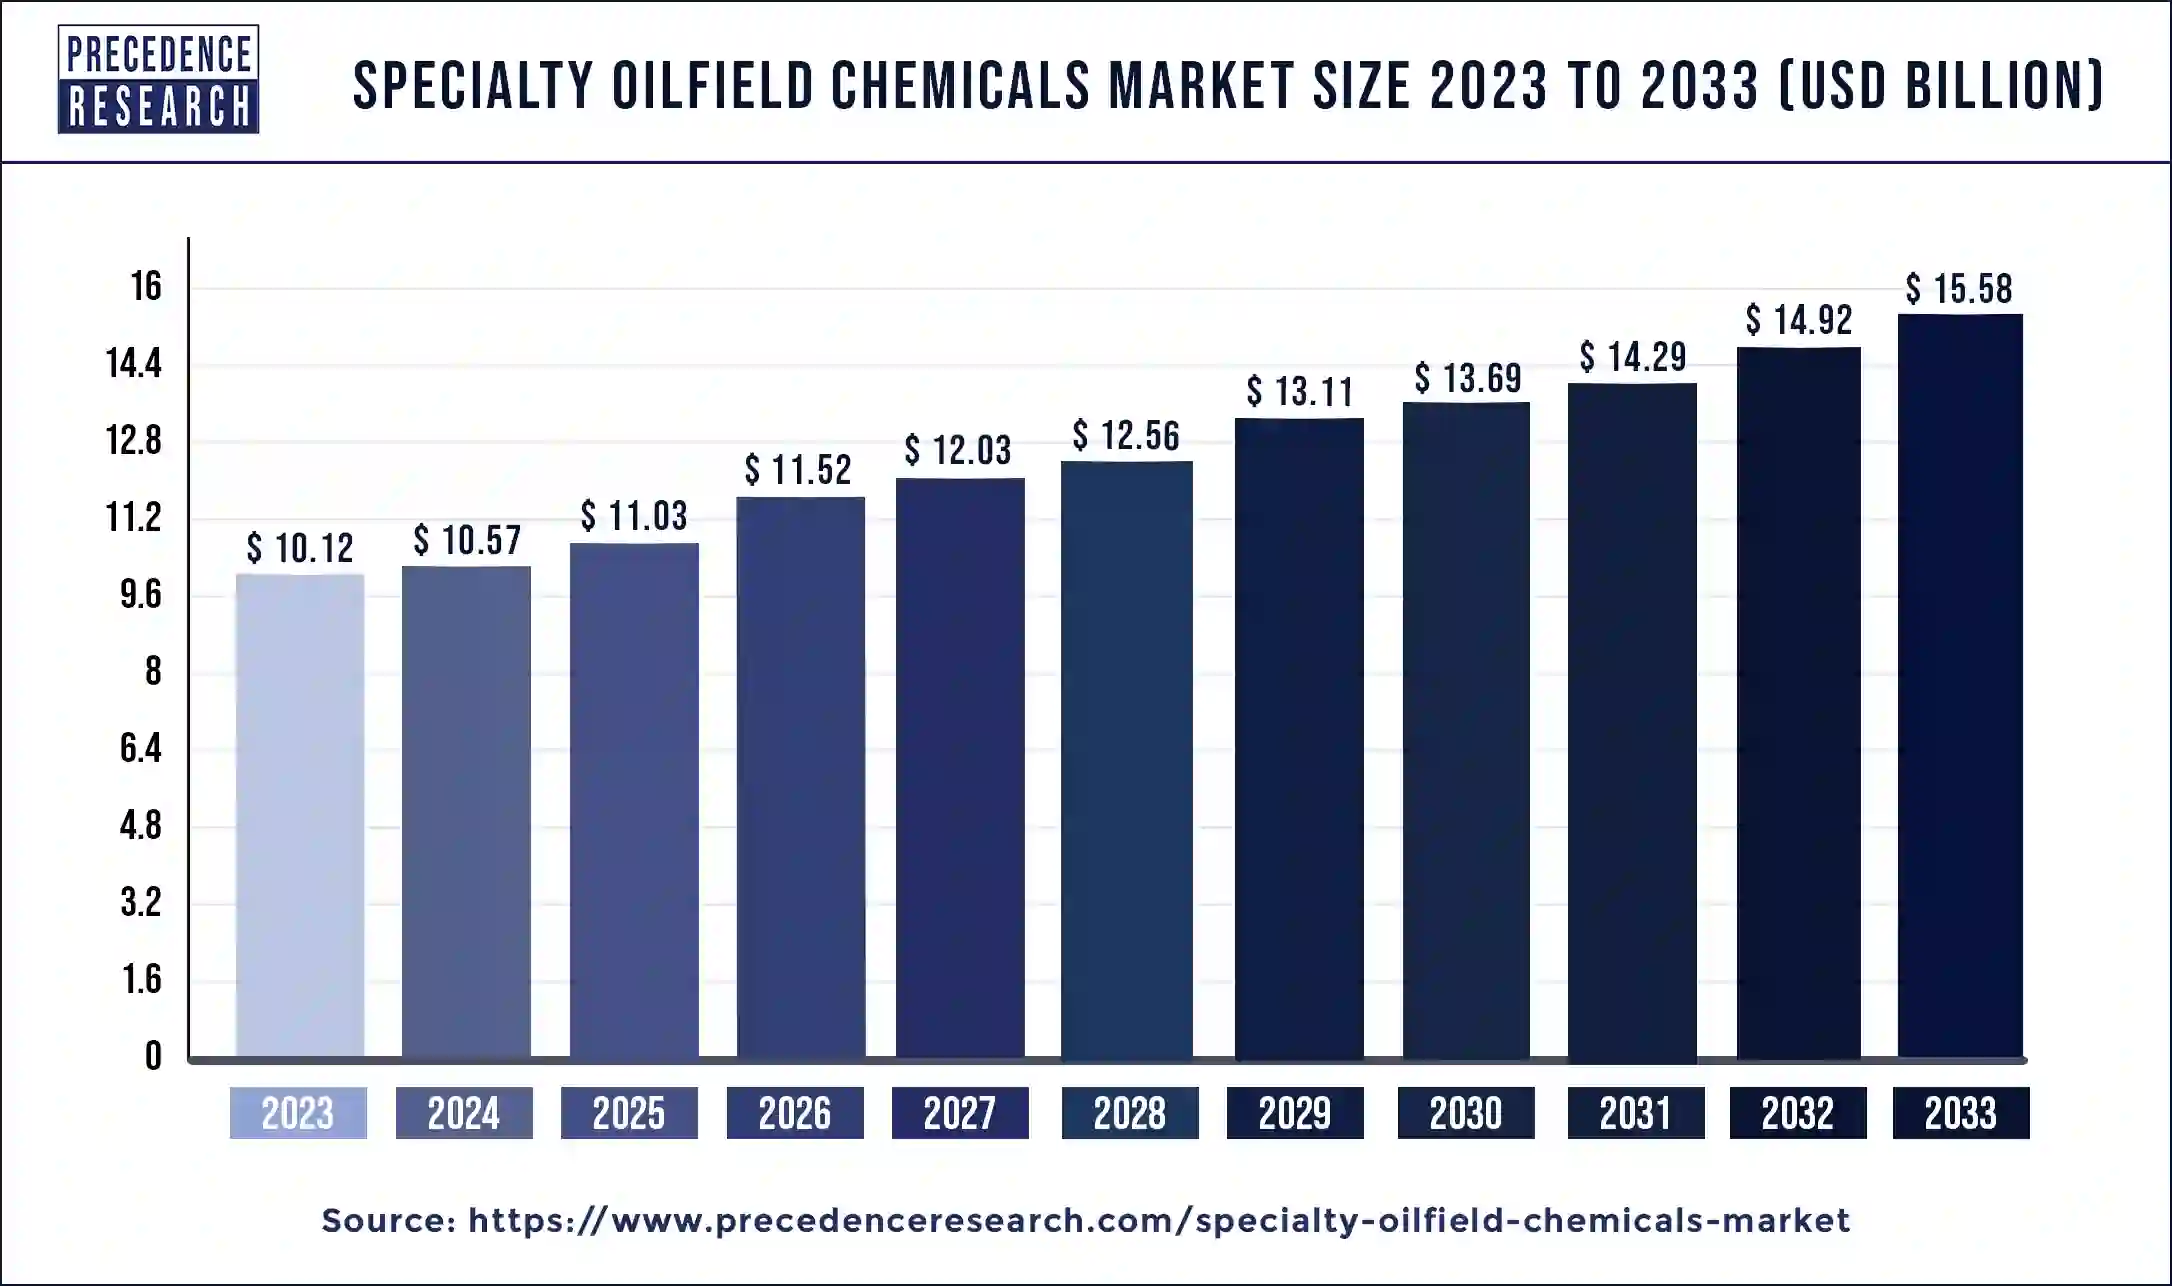 Specialty Oilfield Chemicals Market Size 2024 to 2033